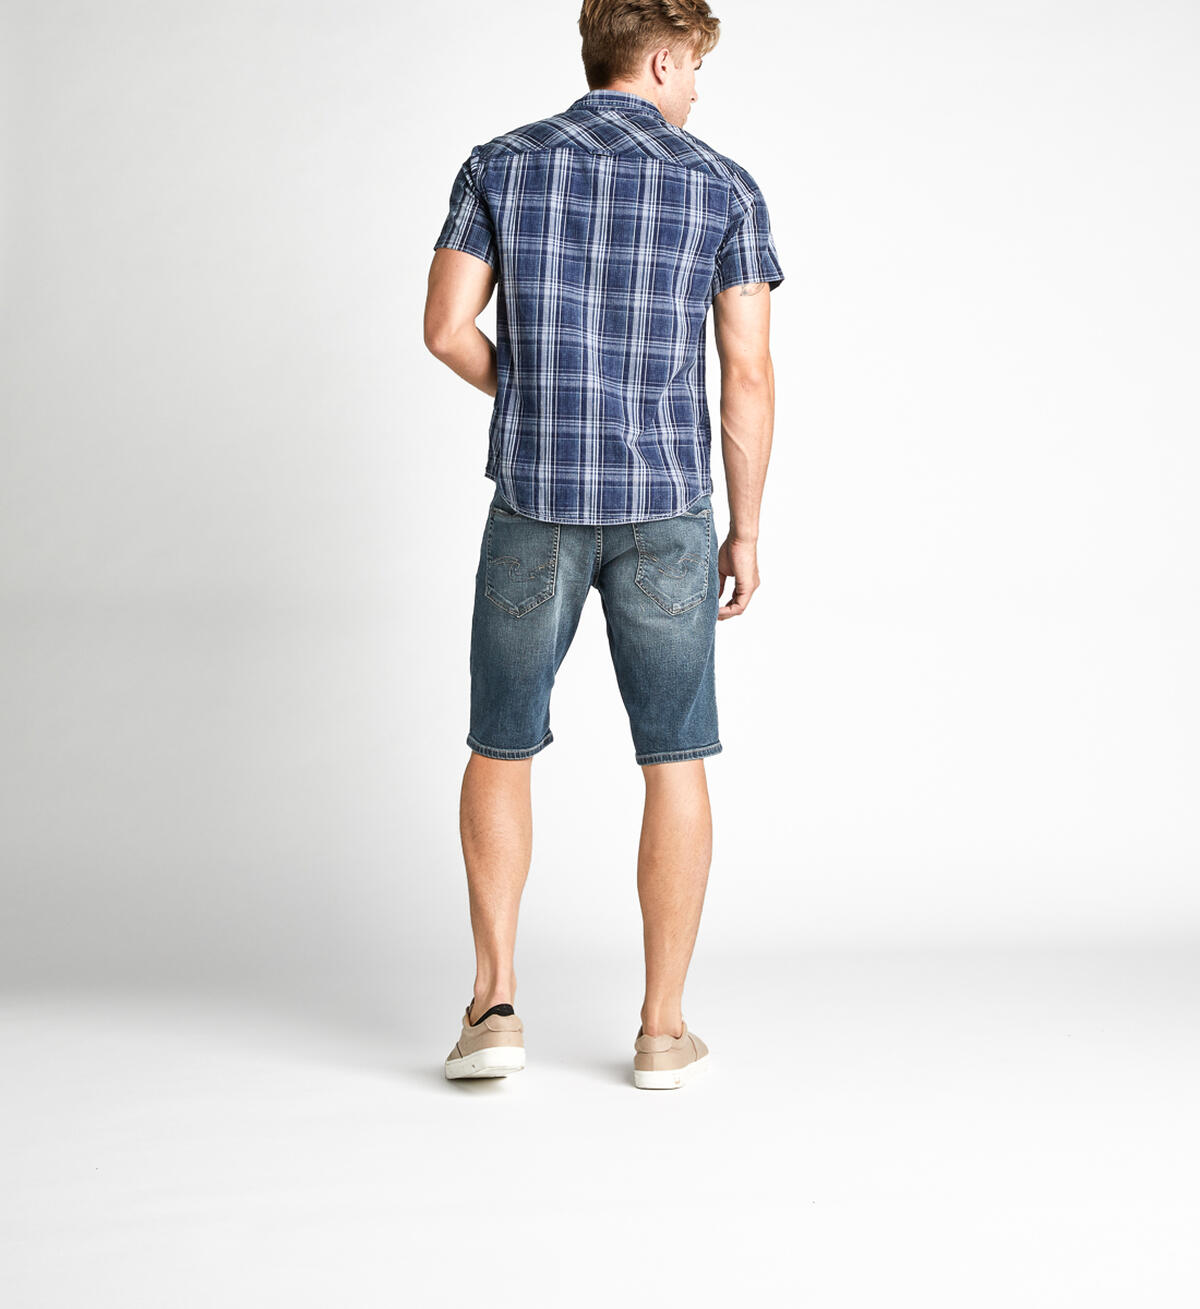 Colter Short-Sleeve Classic Shirt, , hi-res image number 2